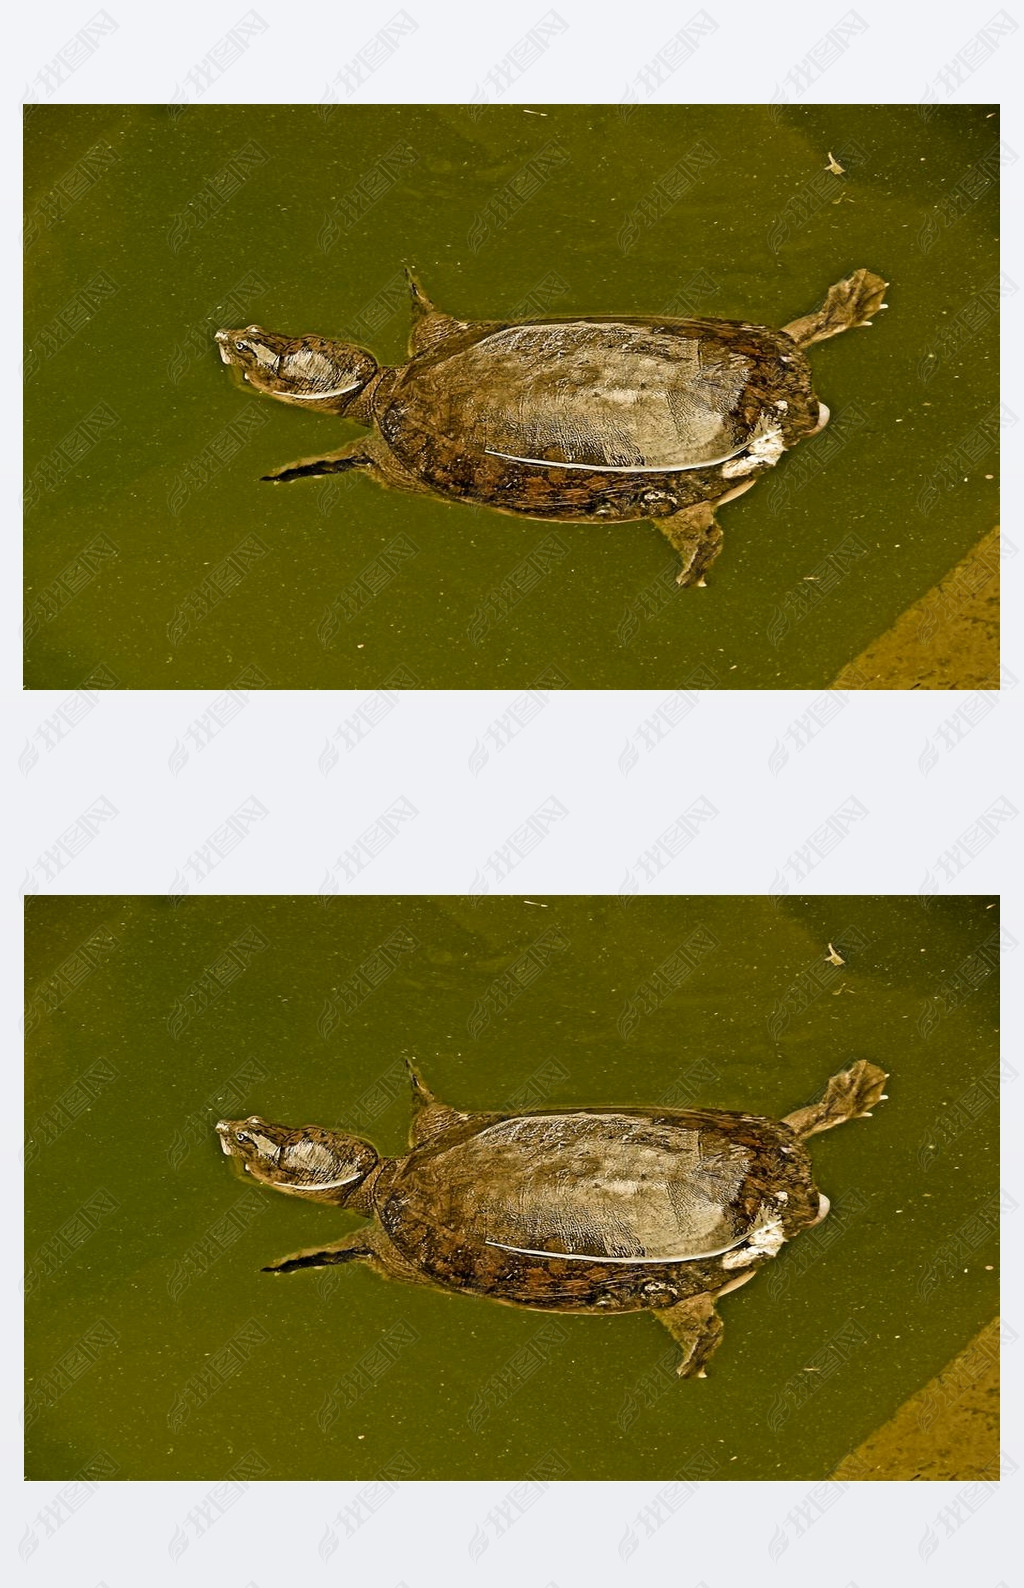 Indian flapshell turtle in water